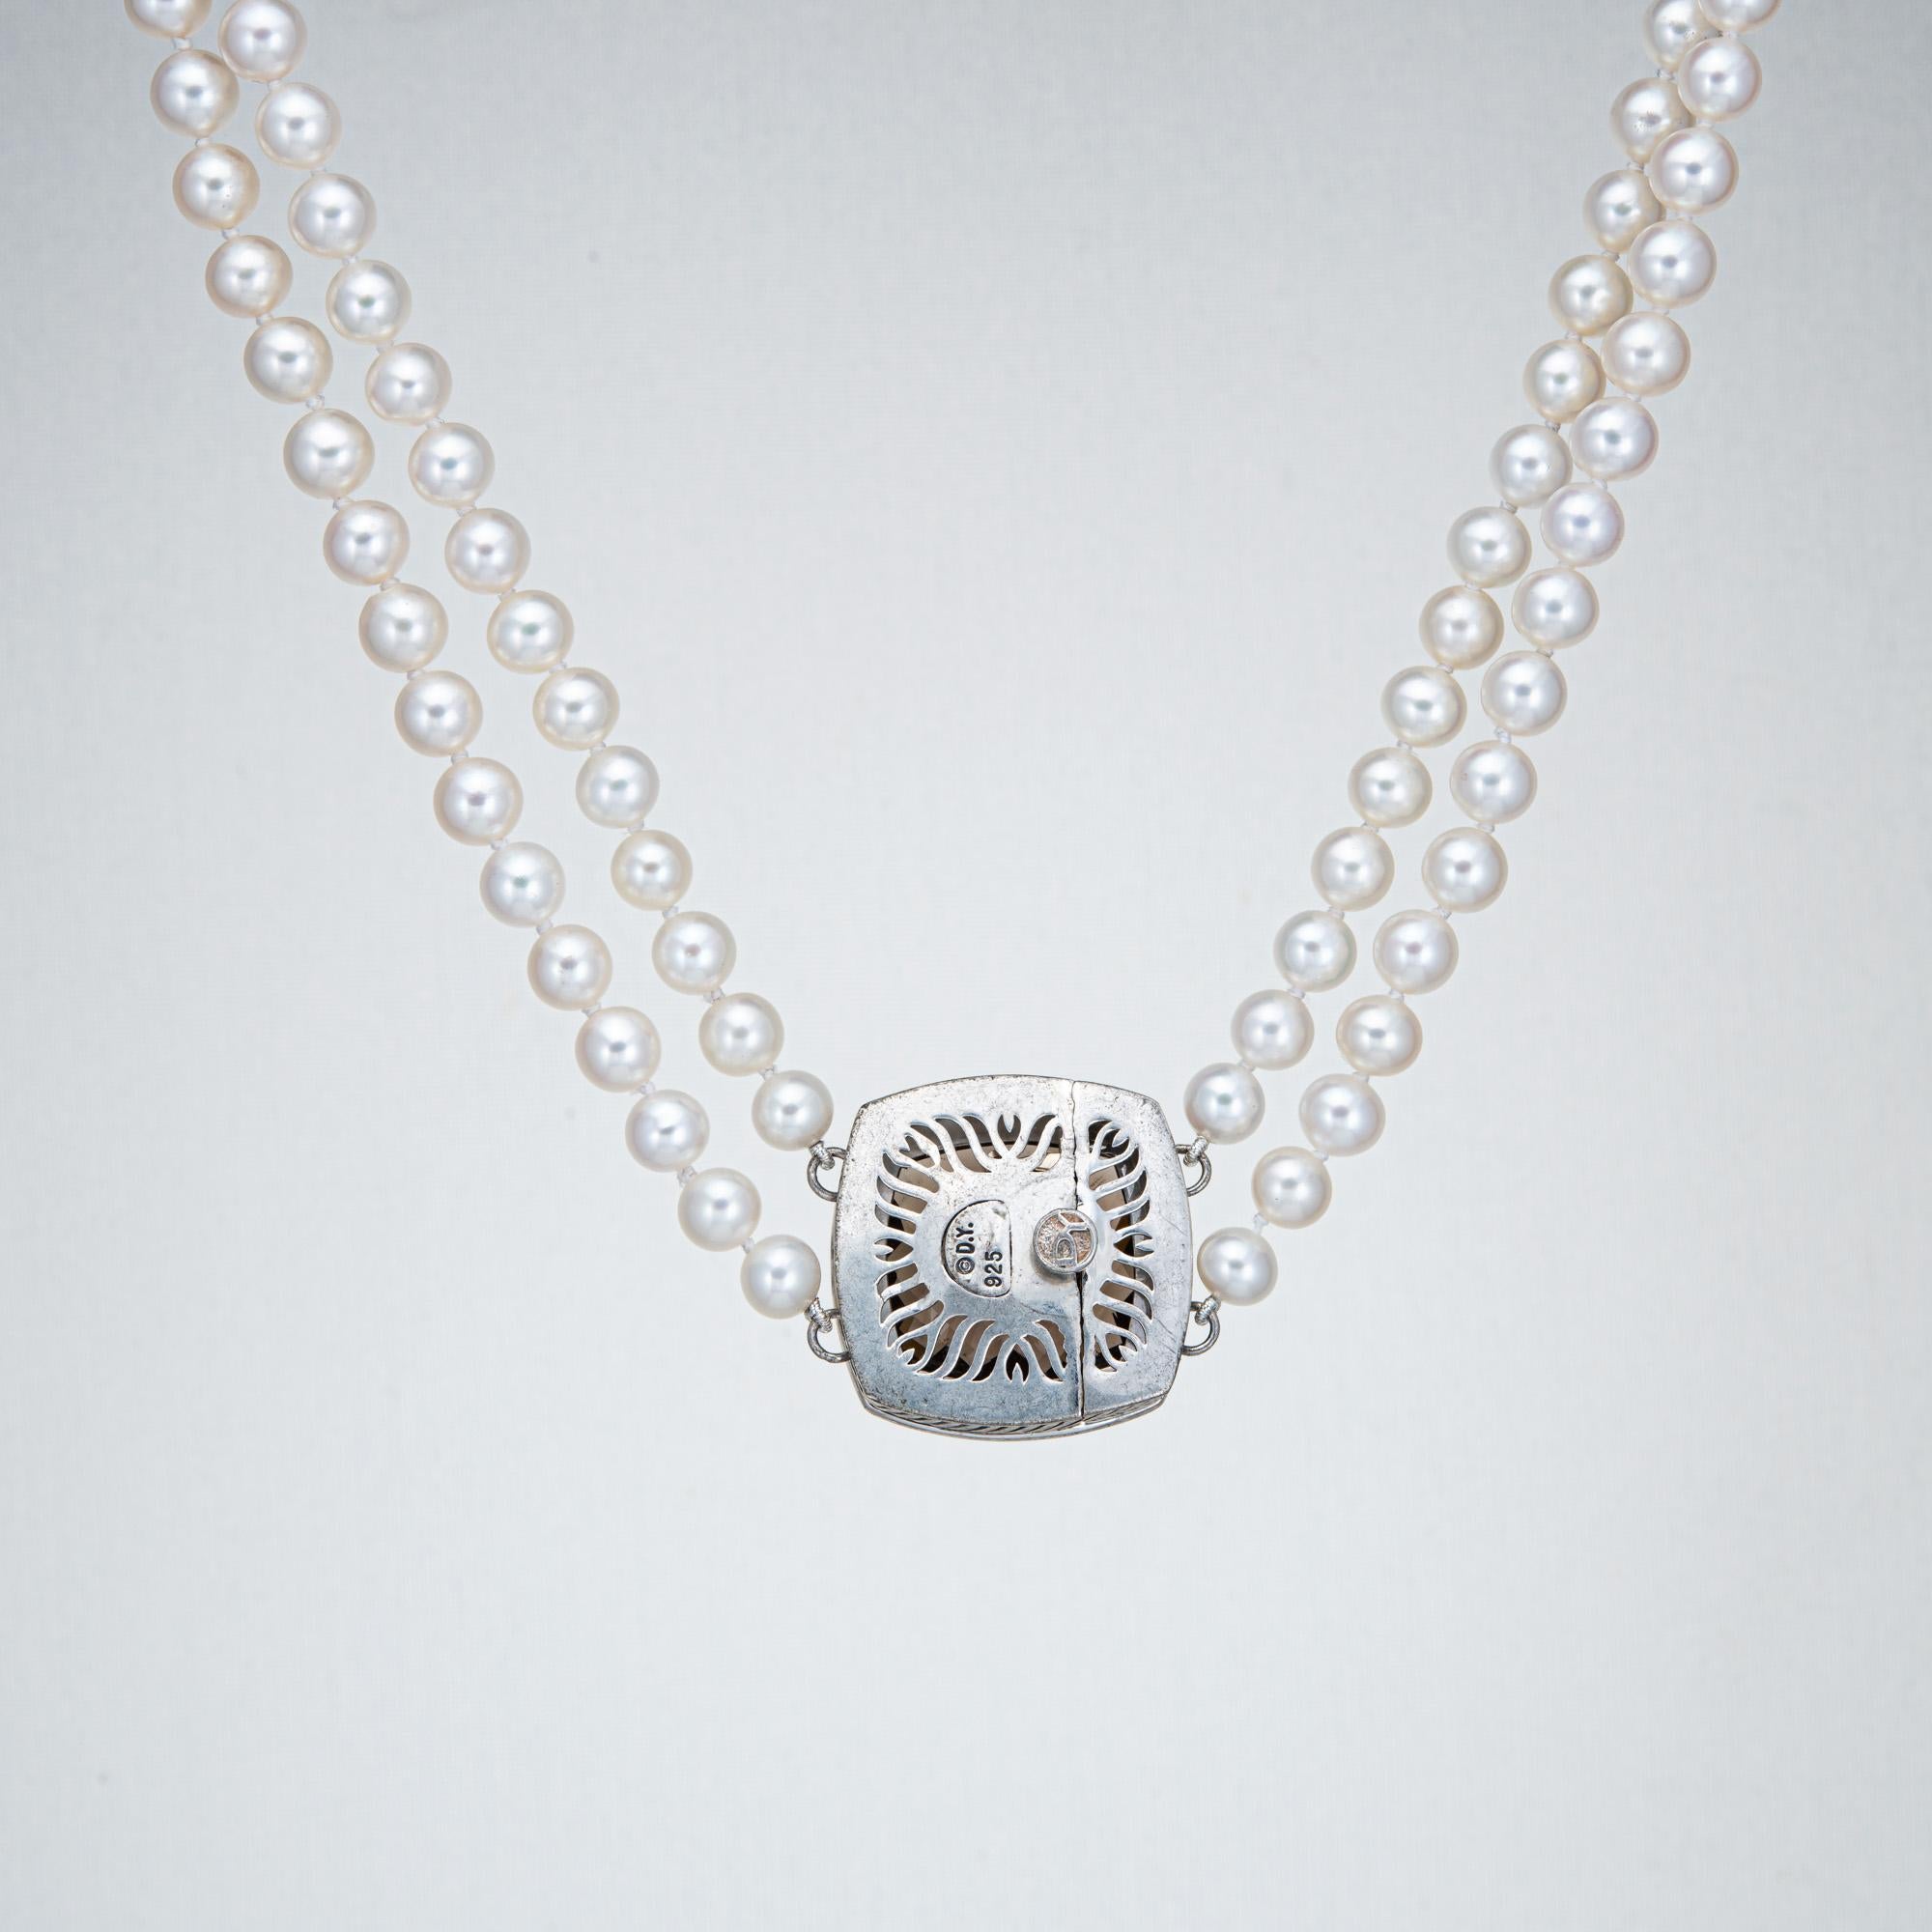 Finely detailed estate David Yurman double strand pearl necklace with a sterling silver diamond & smoky quartz set clasp.  

Checkerboard faceted smoky quartz measures 20mm. 50 diamonds total an estimated 0.40 carats (estimated at H-I color and